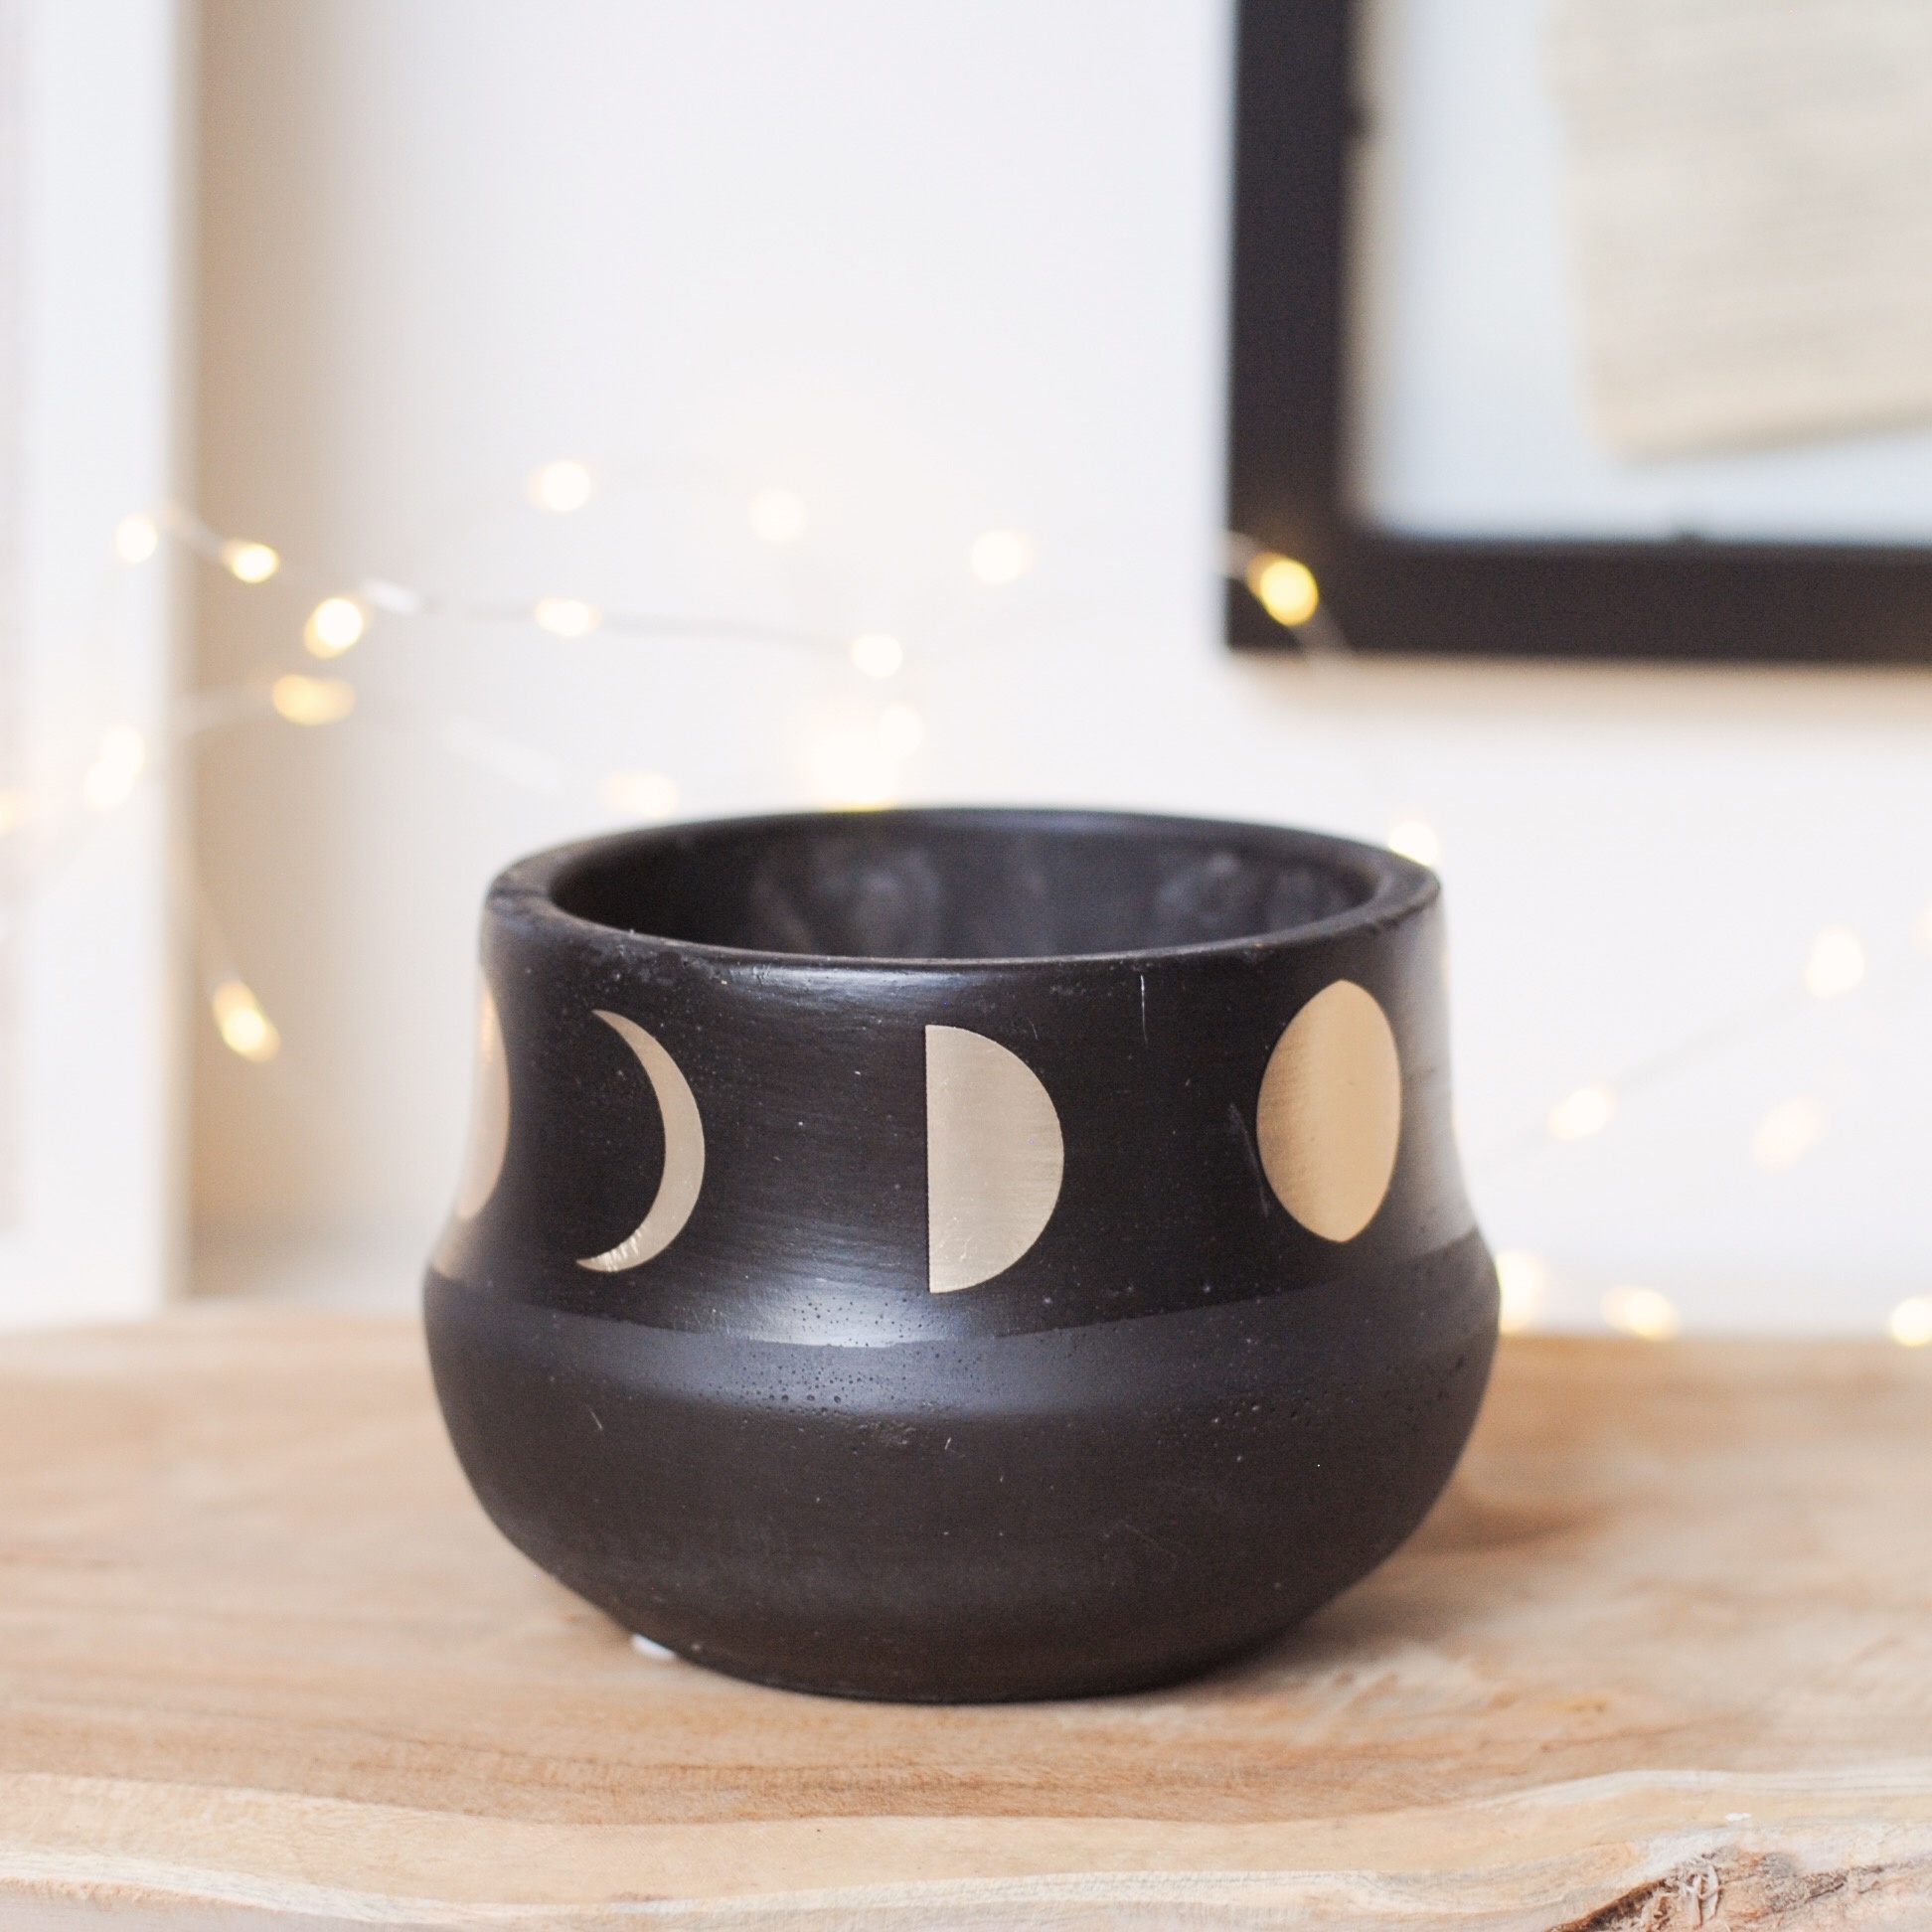 MOON PHASES PLANTER